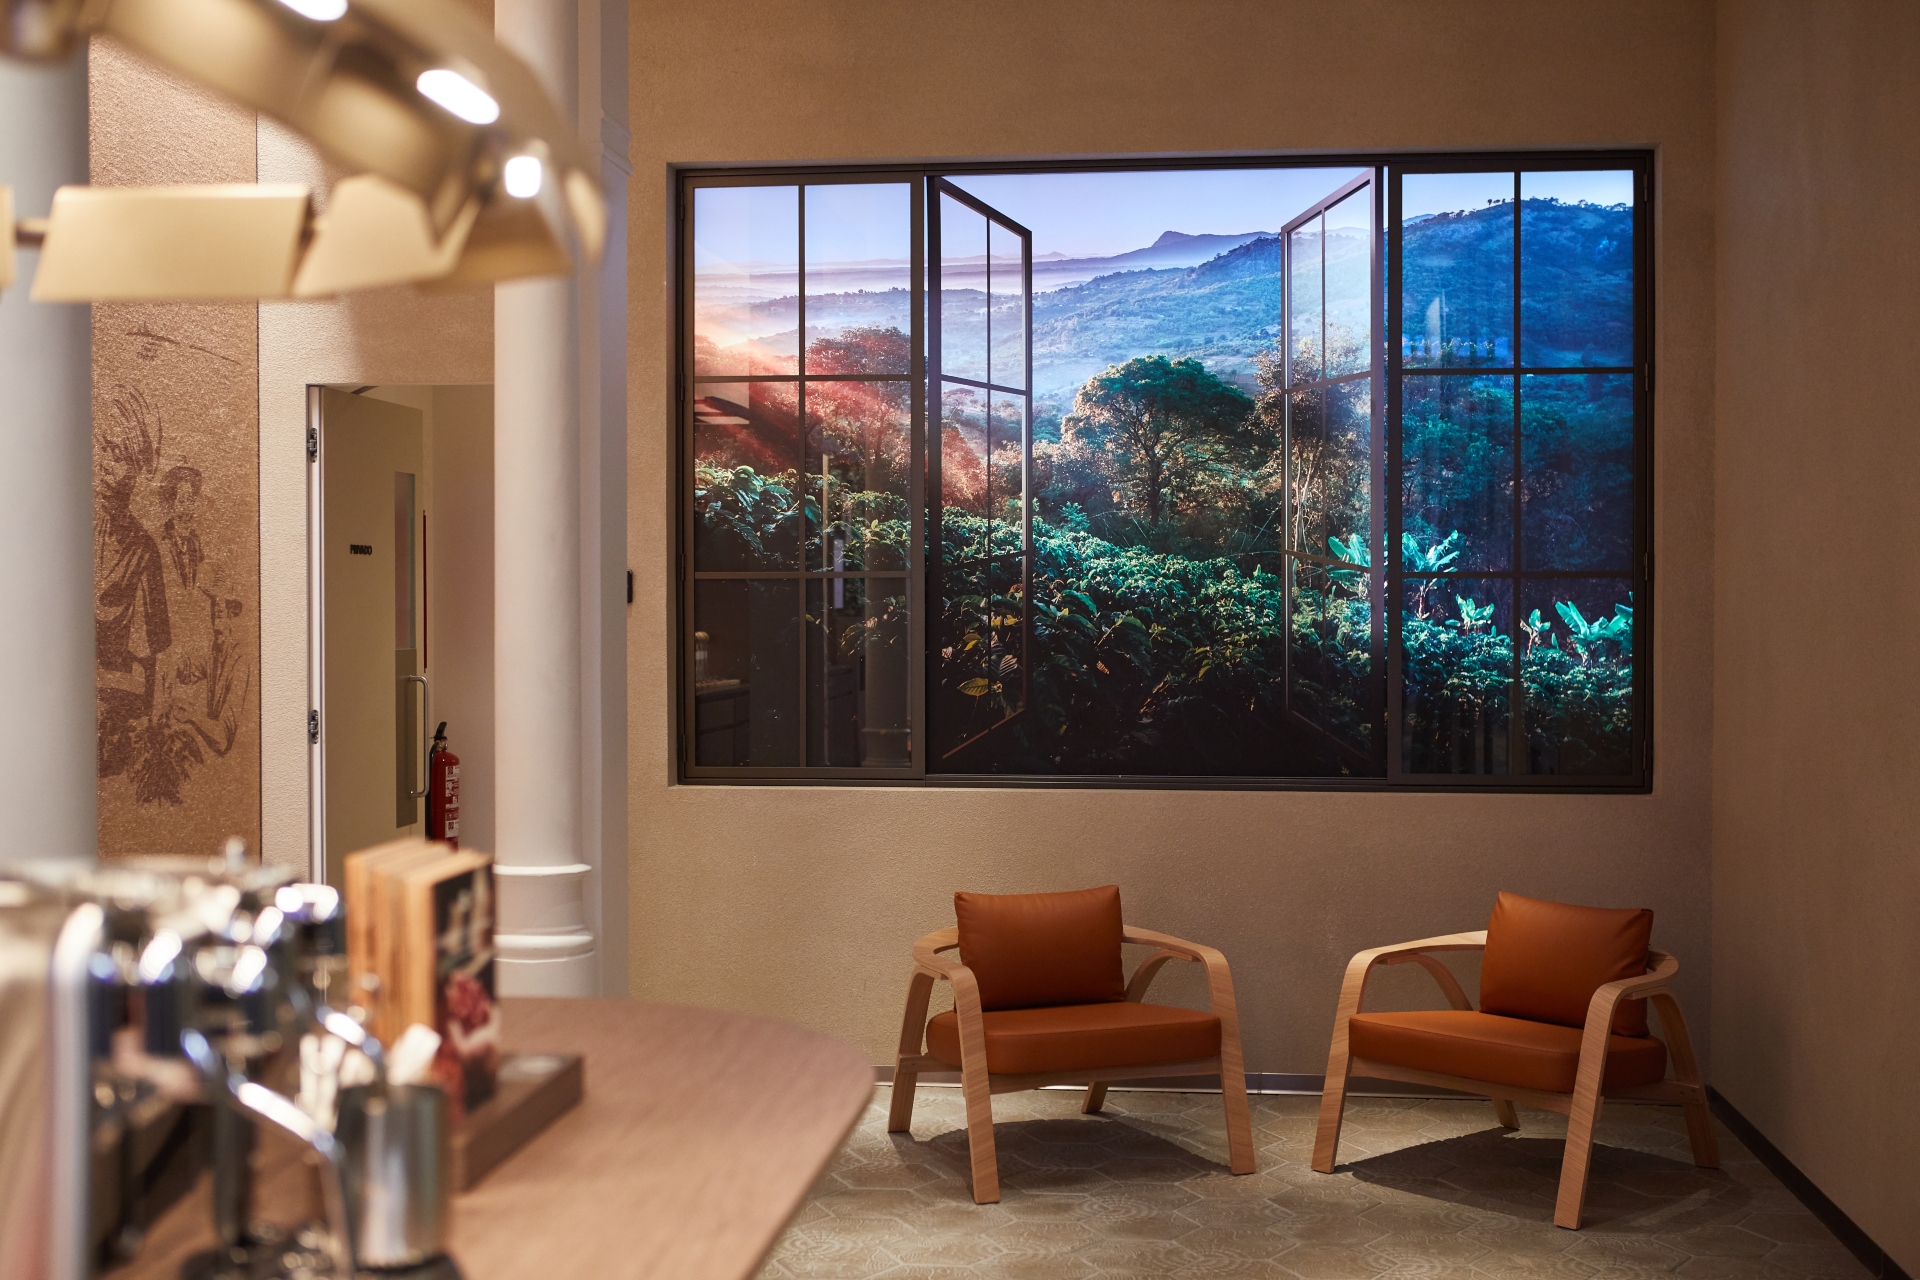 Room with two chairs and a window looking out to the jungle in  Nespresso’s “Farm to Window” campaign